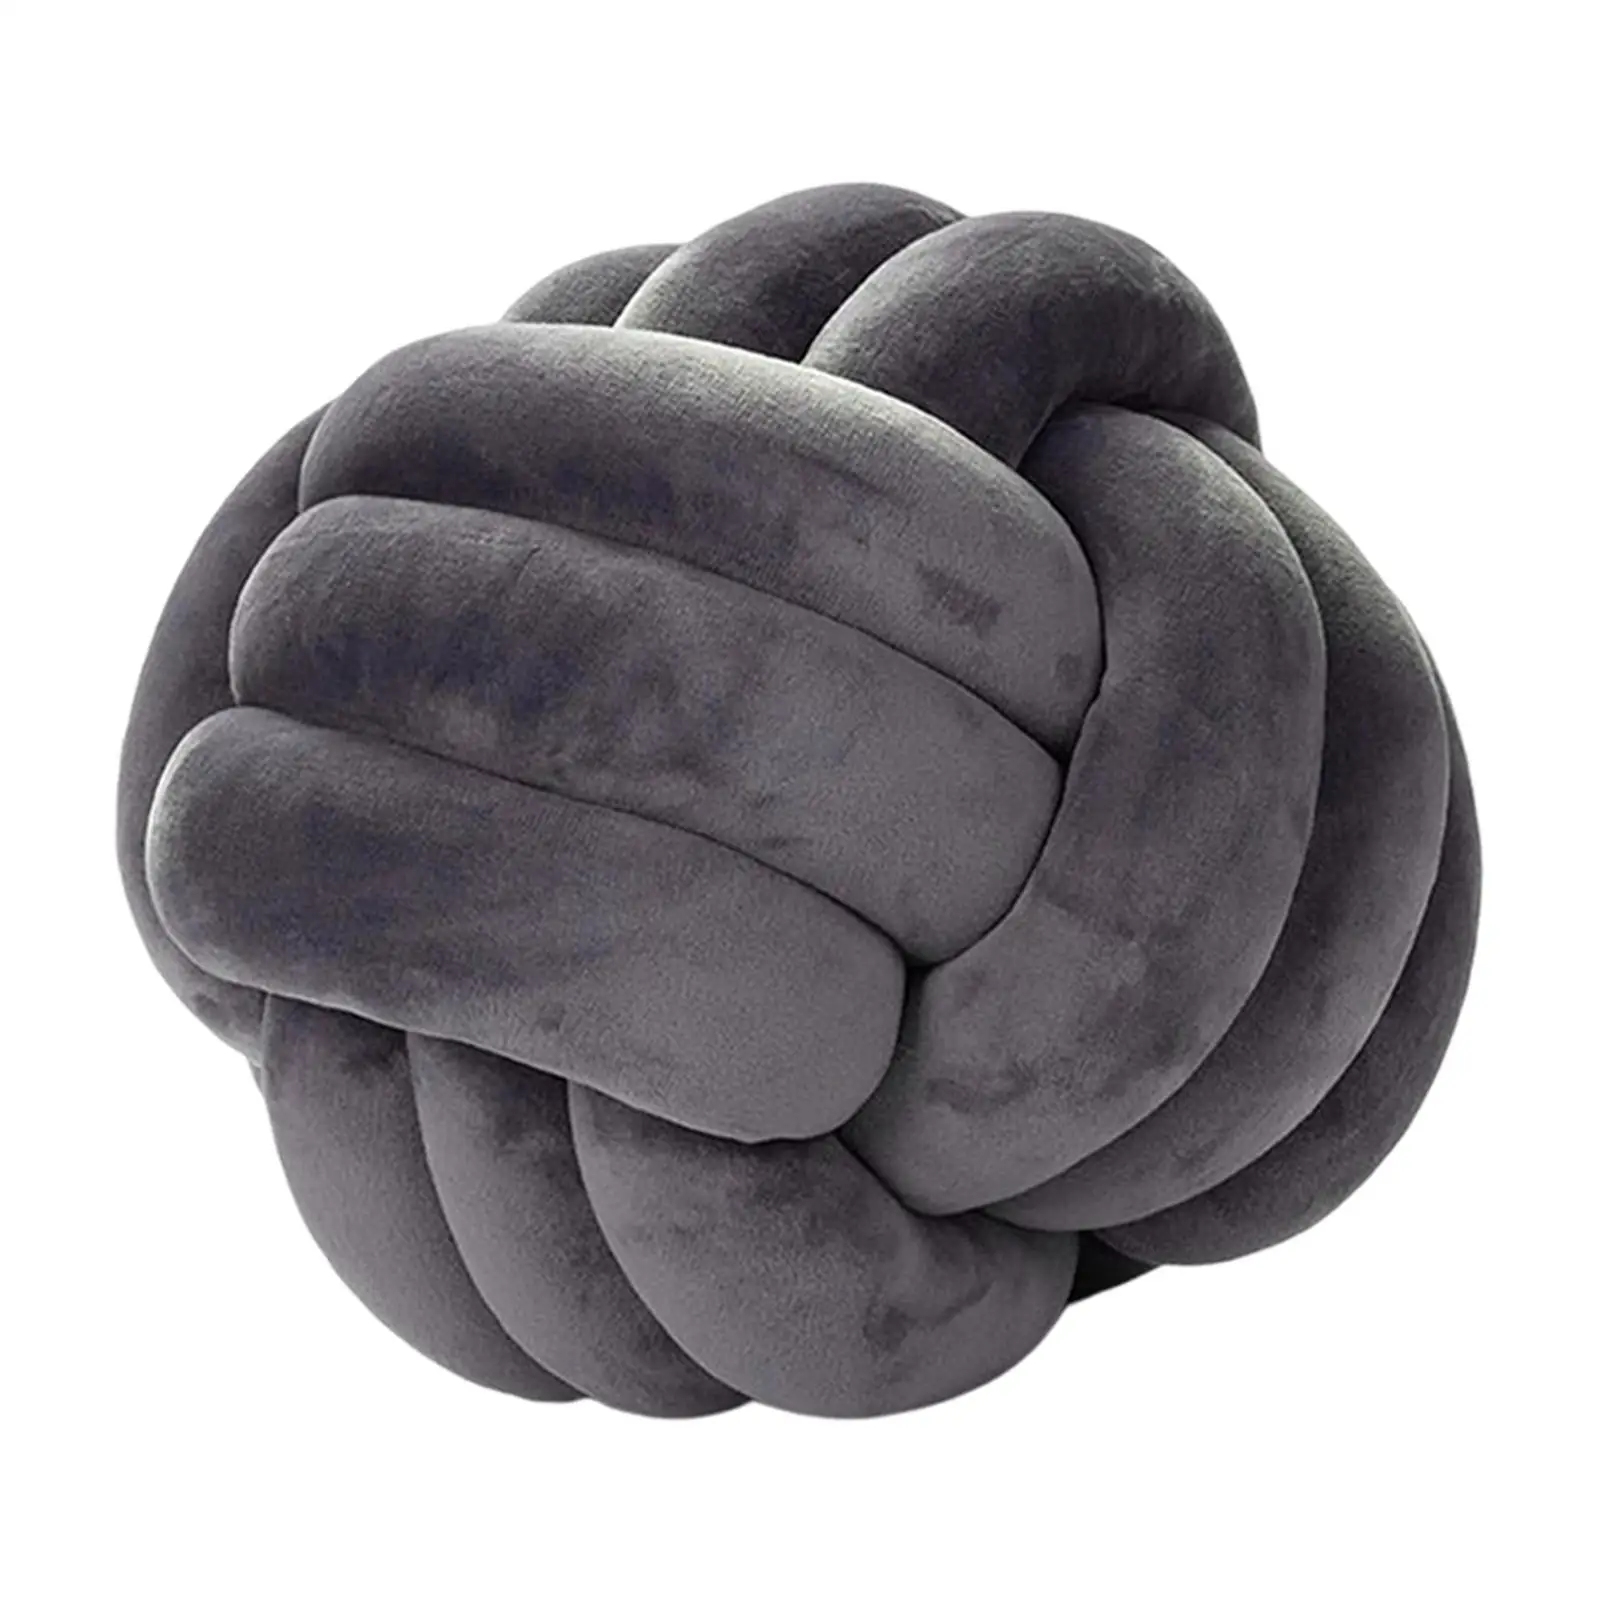 Soft Knot Ball Pillow Photography Props Plush Pillow Hand Woven Throw Knotted Pillow for Sofa Bed Chairs Home Decoration 22cm